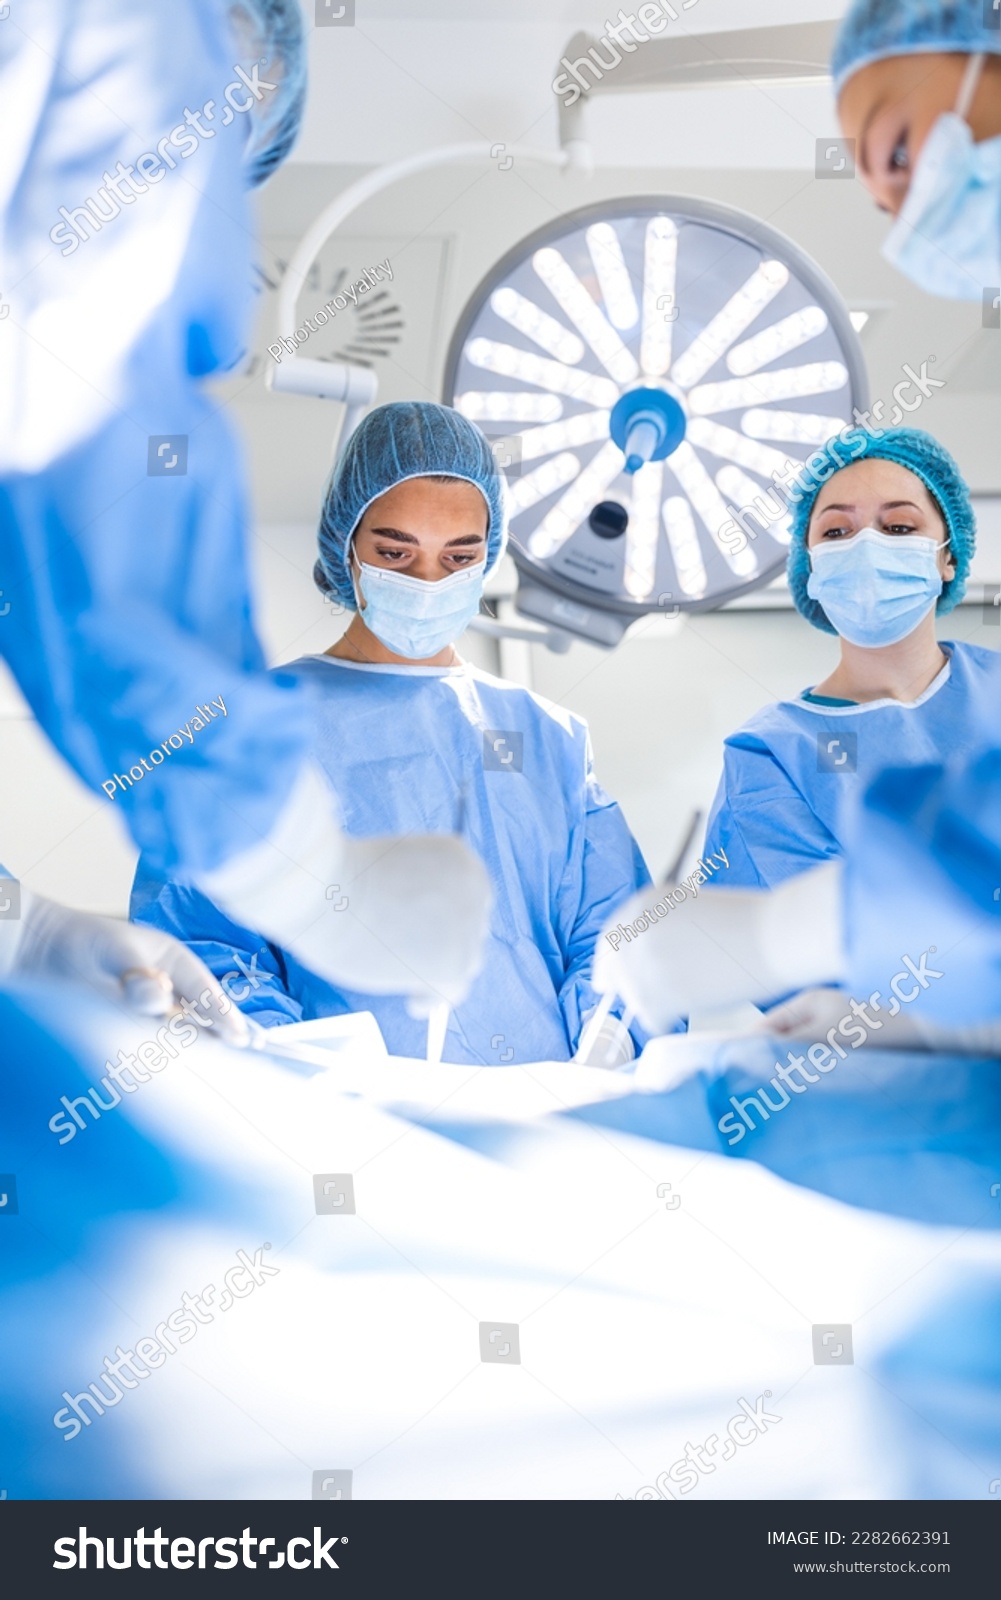 Group of surgeons wearing safety masks performing operation. Medicine concept. surgery, medicine and people concept - group of surgeons at operation in operating room at hospital #2282662391